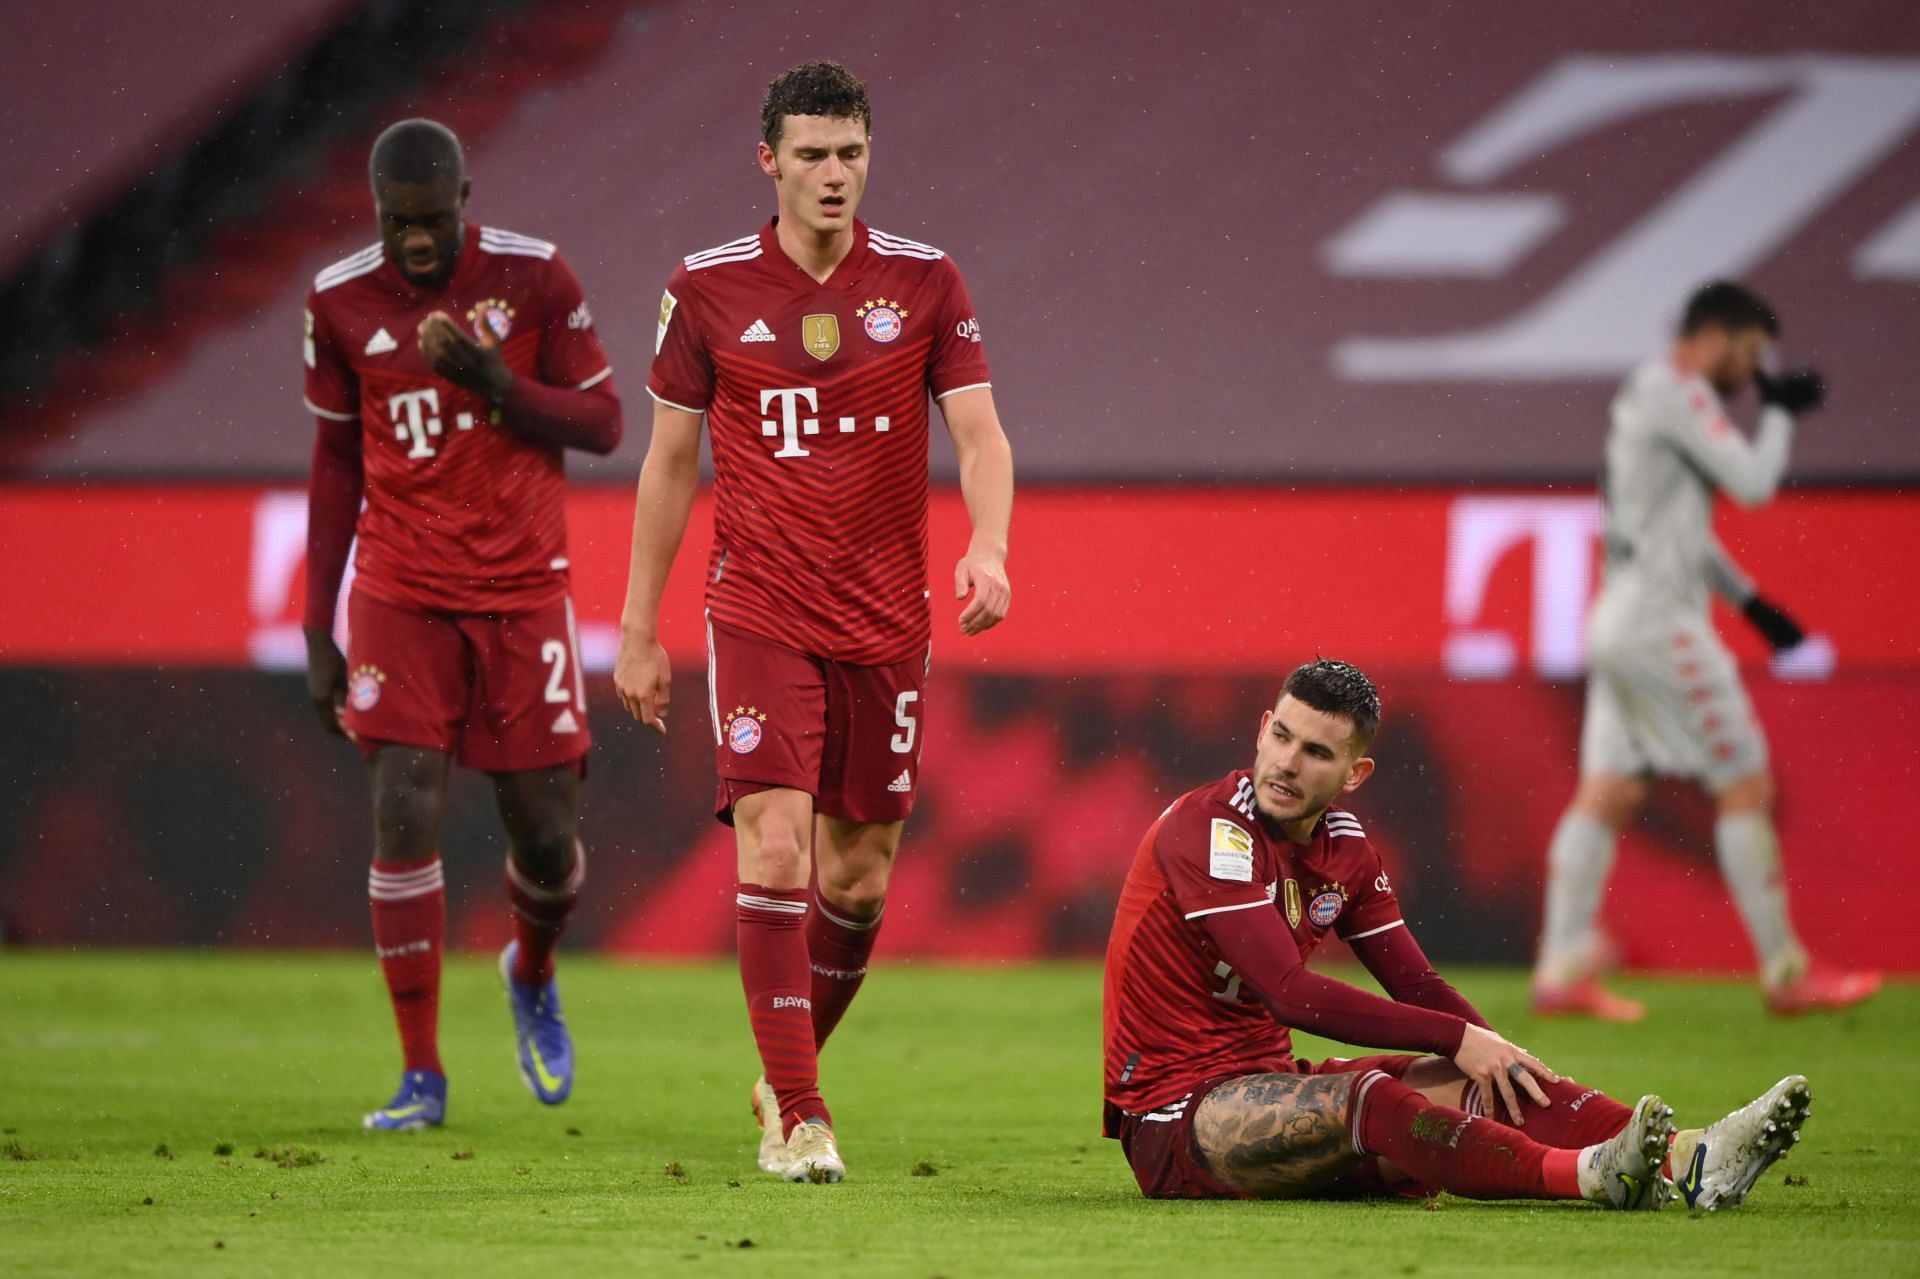 The Bavarians have conceded the least goals in both the Champions League and Bundesliga this term